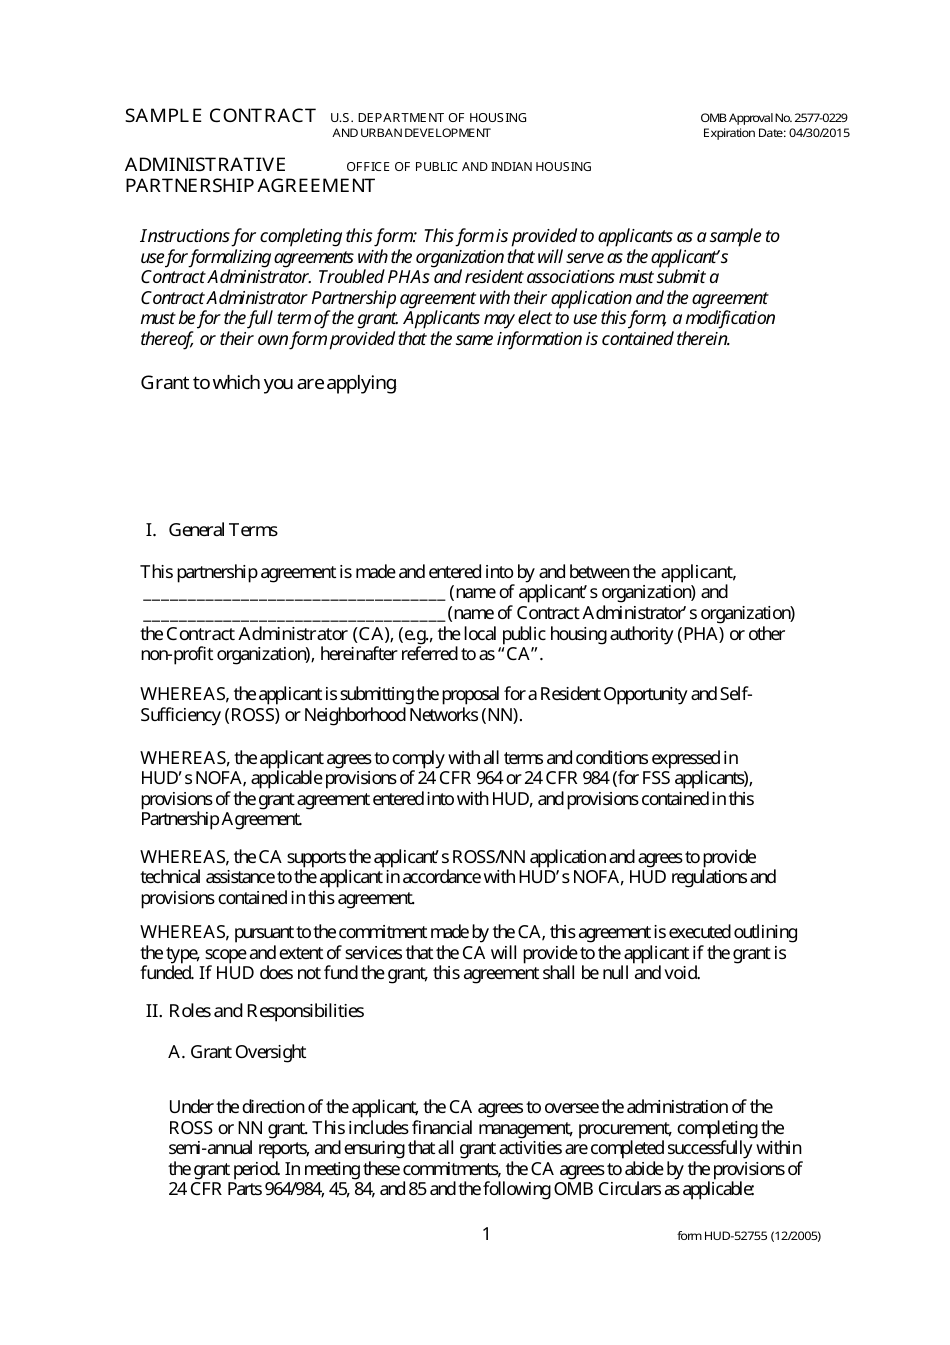 Form HUD-52755 Sample Contract - Administrative Partnership Agreement, Page 1